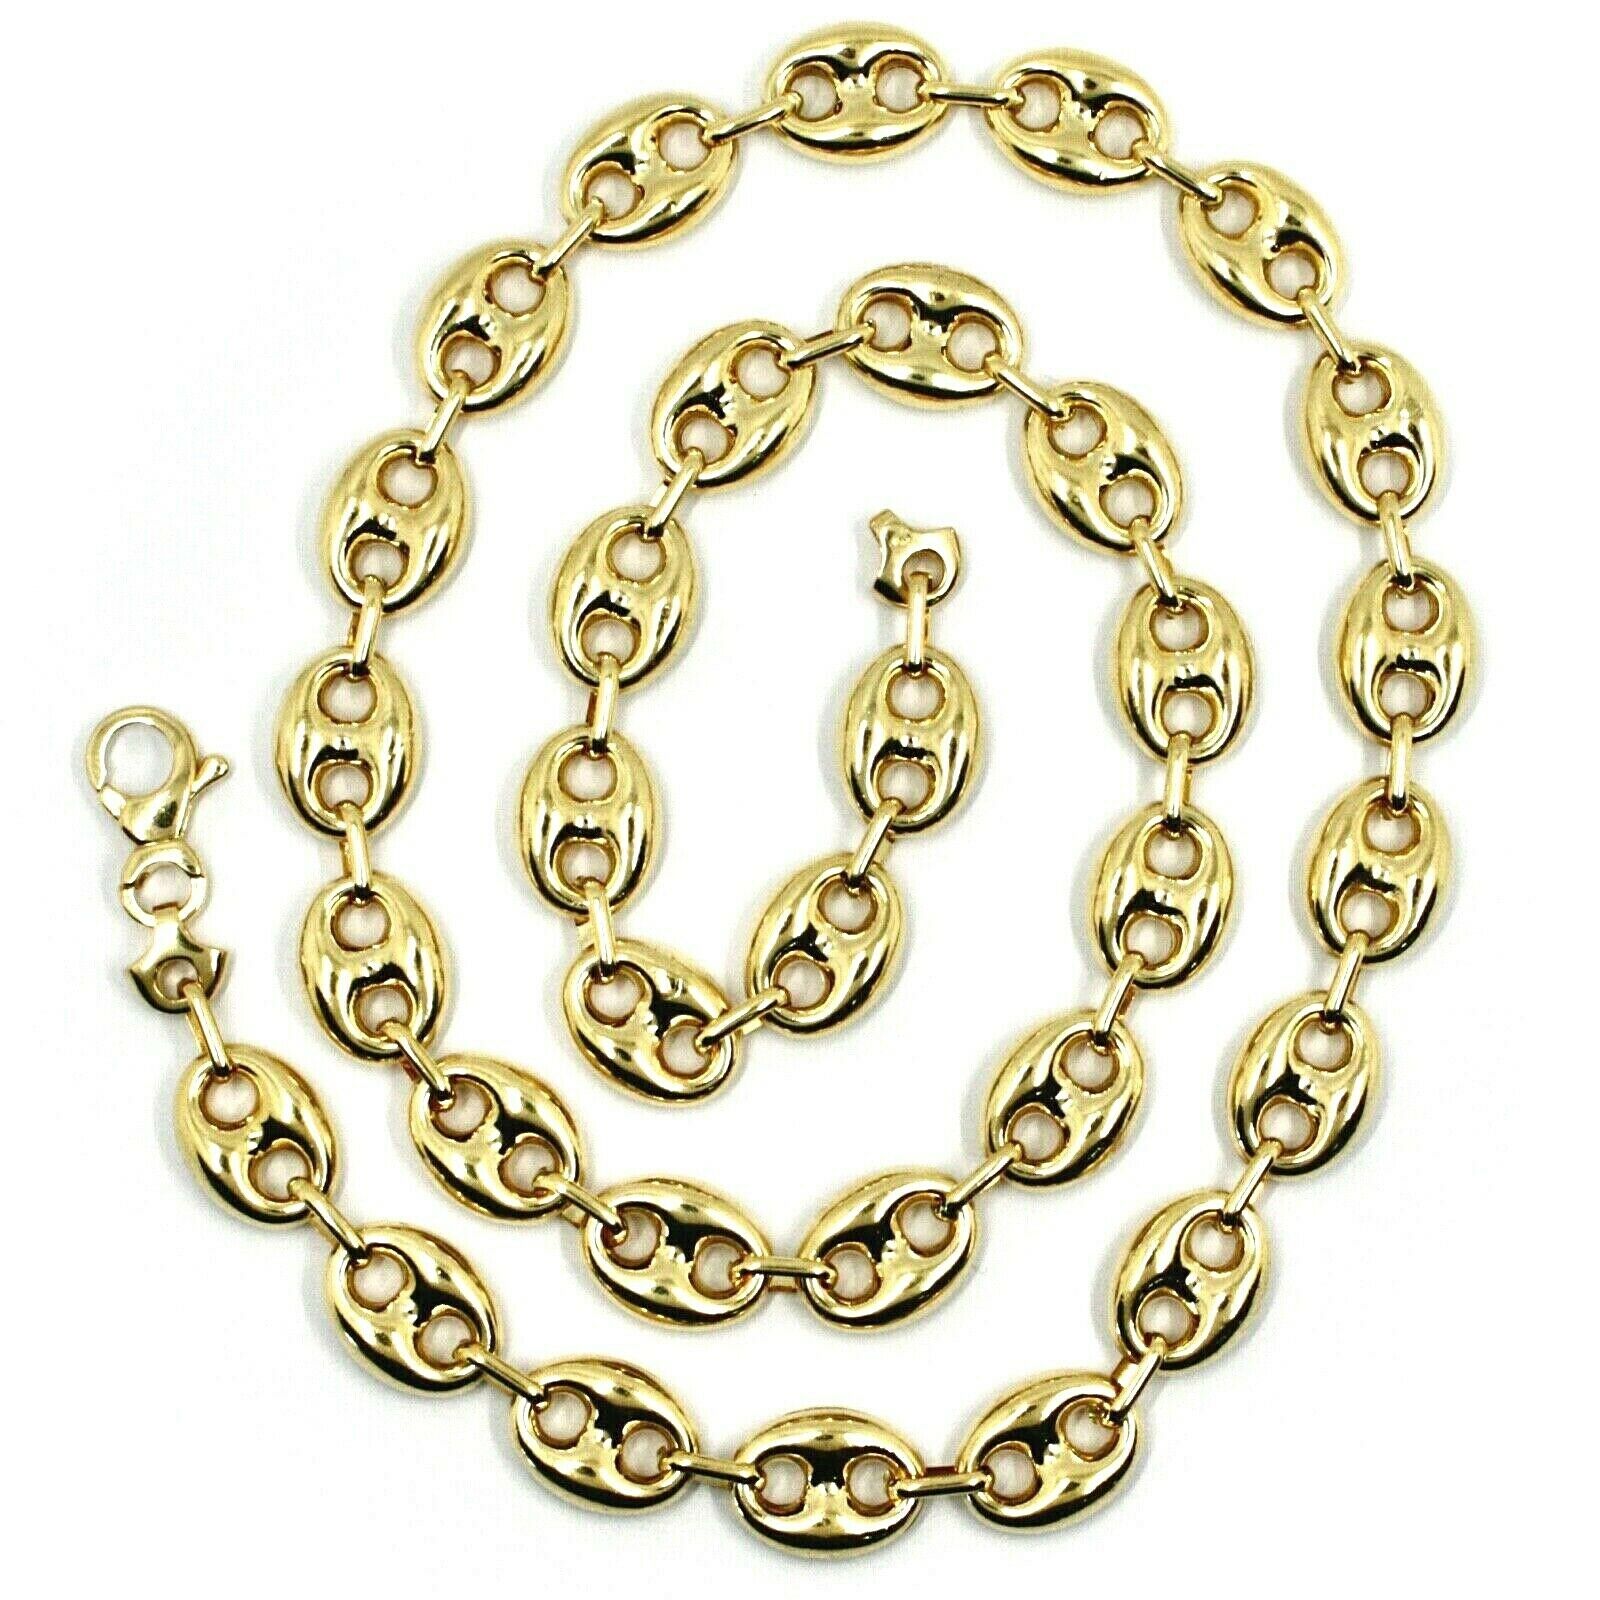 Buy 14k REAL Yellow Gold Solid 3mm Flat Mariner Chain Necklace with Lobster  Claw Clasp, Gold at Amazon.in